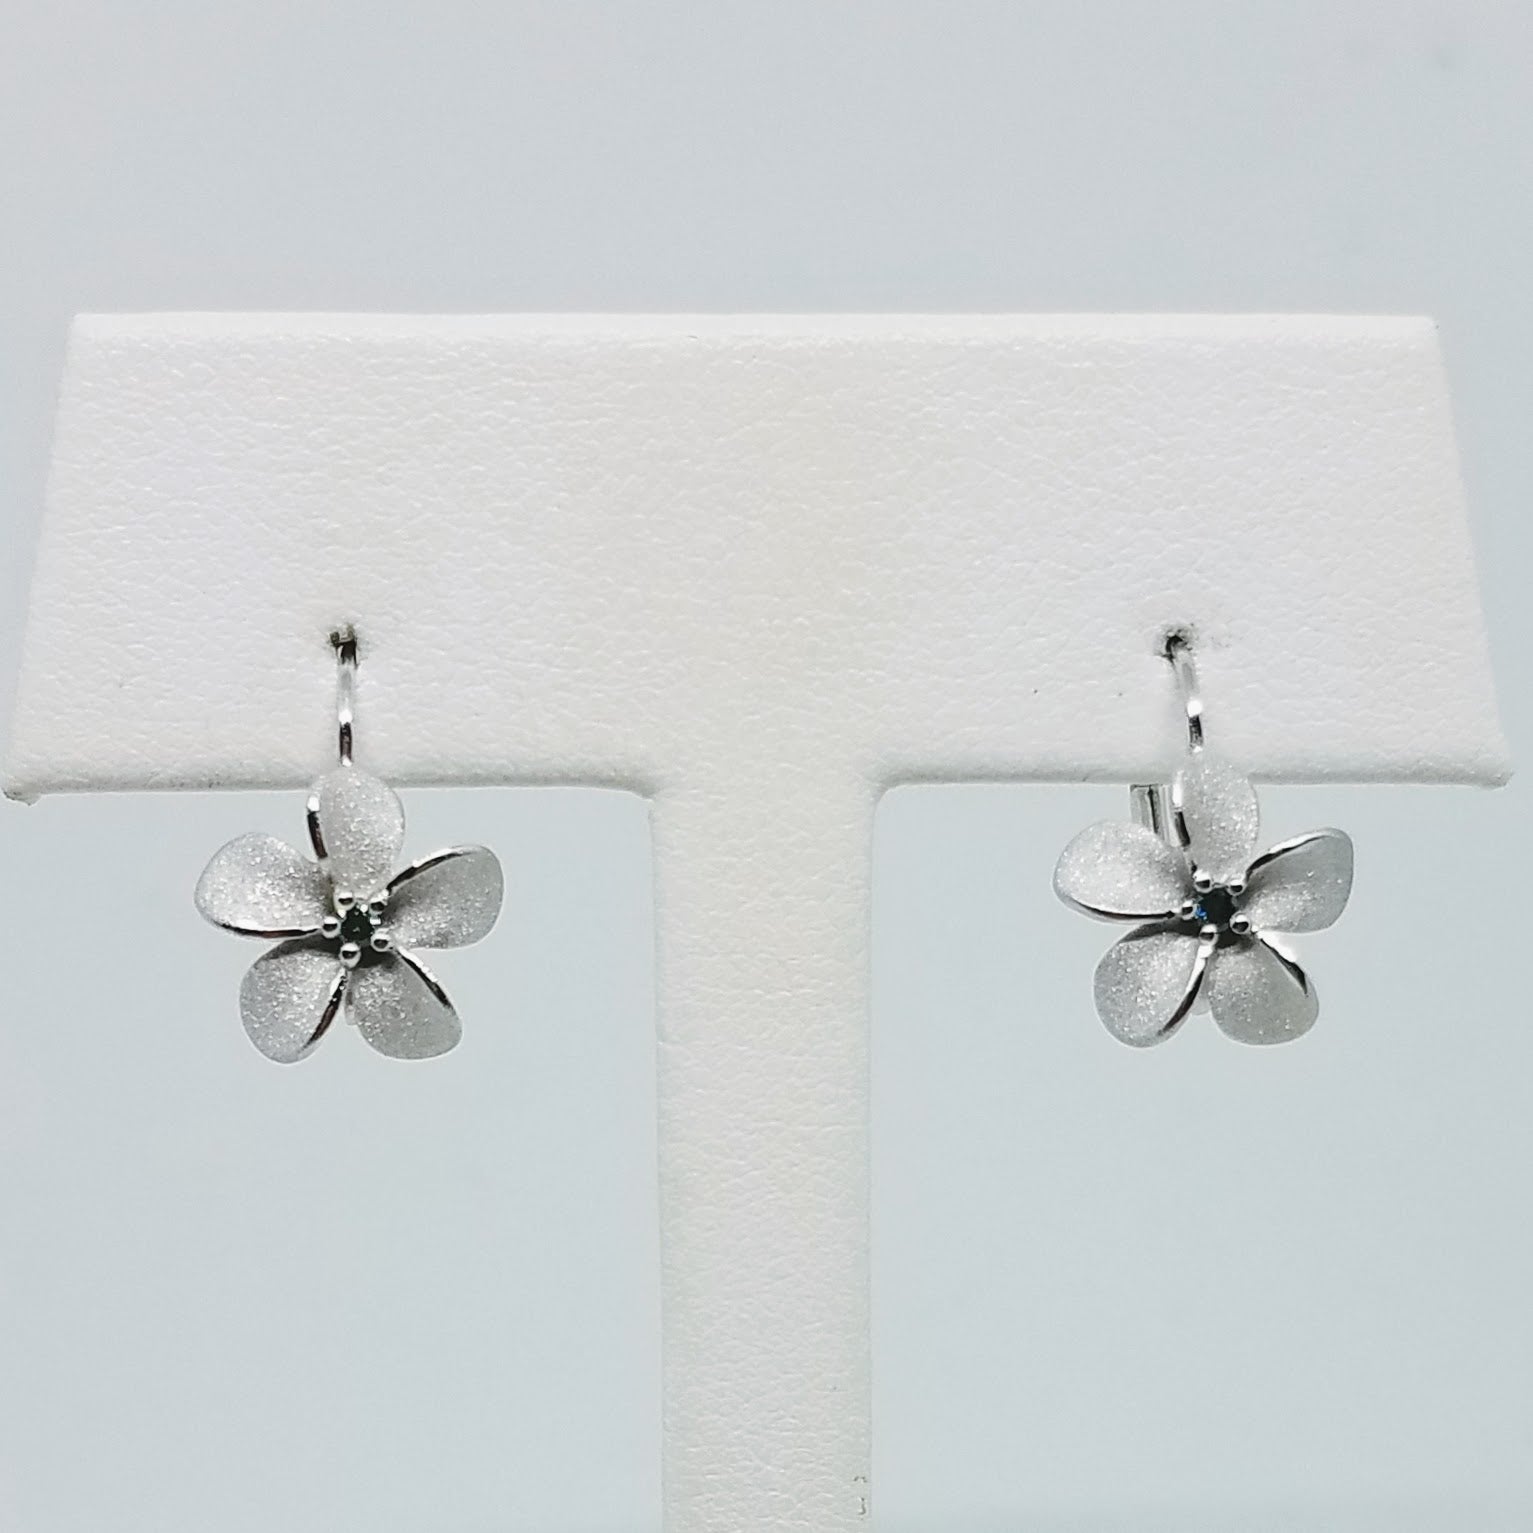 11mm White Gold Plumeria Leverback Earrings with Blue Diamonds